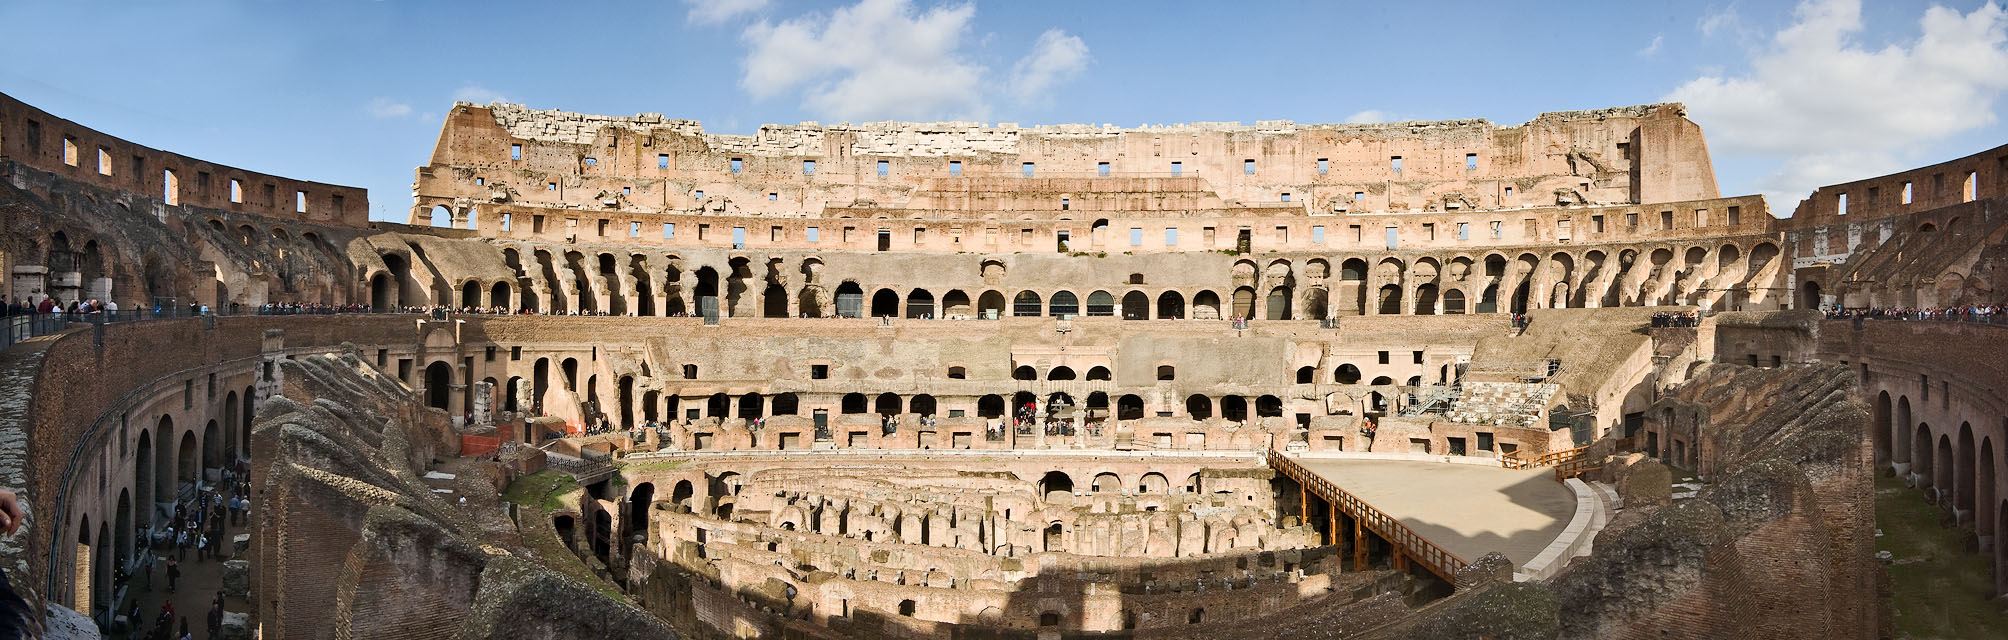 Inside of the Colosseum - side view